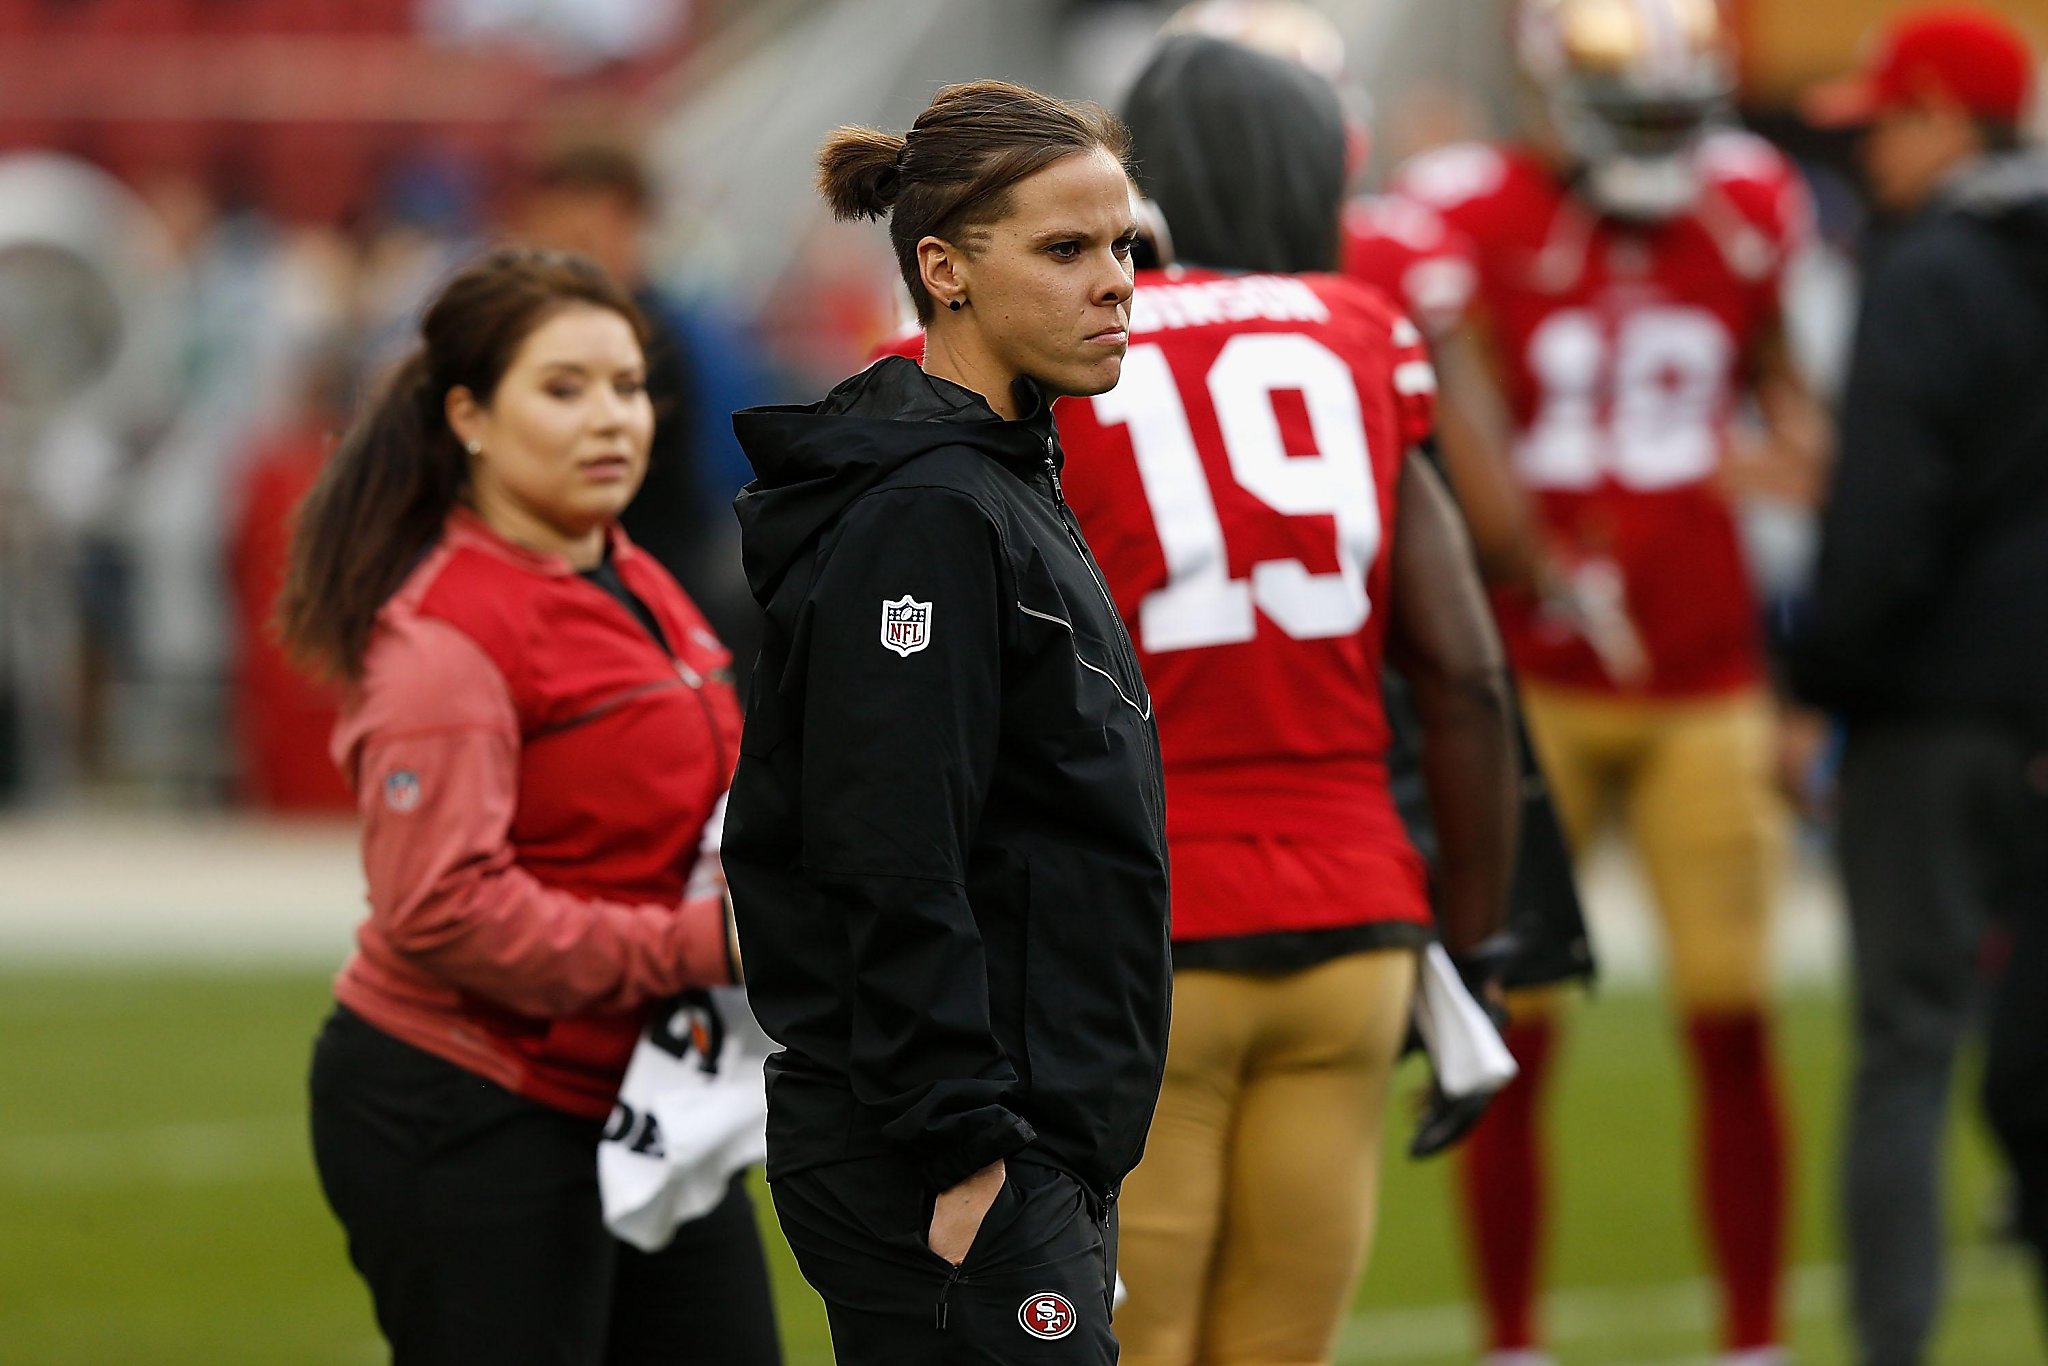 49ers propose locker rooms for women at all NFL stadiums